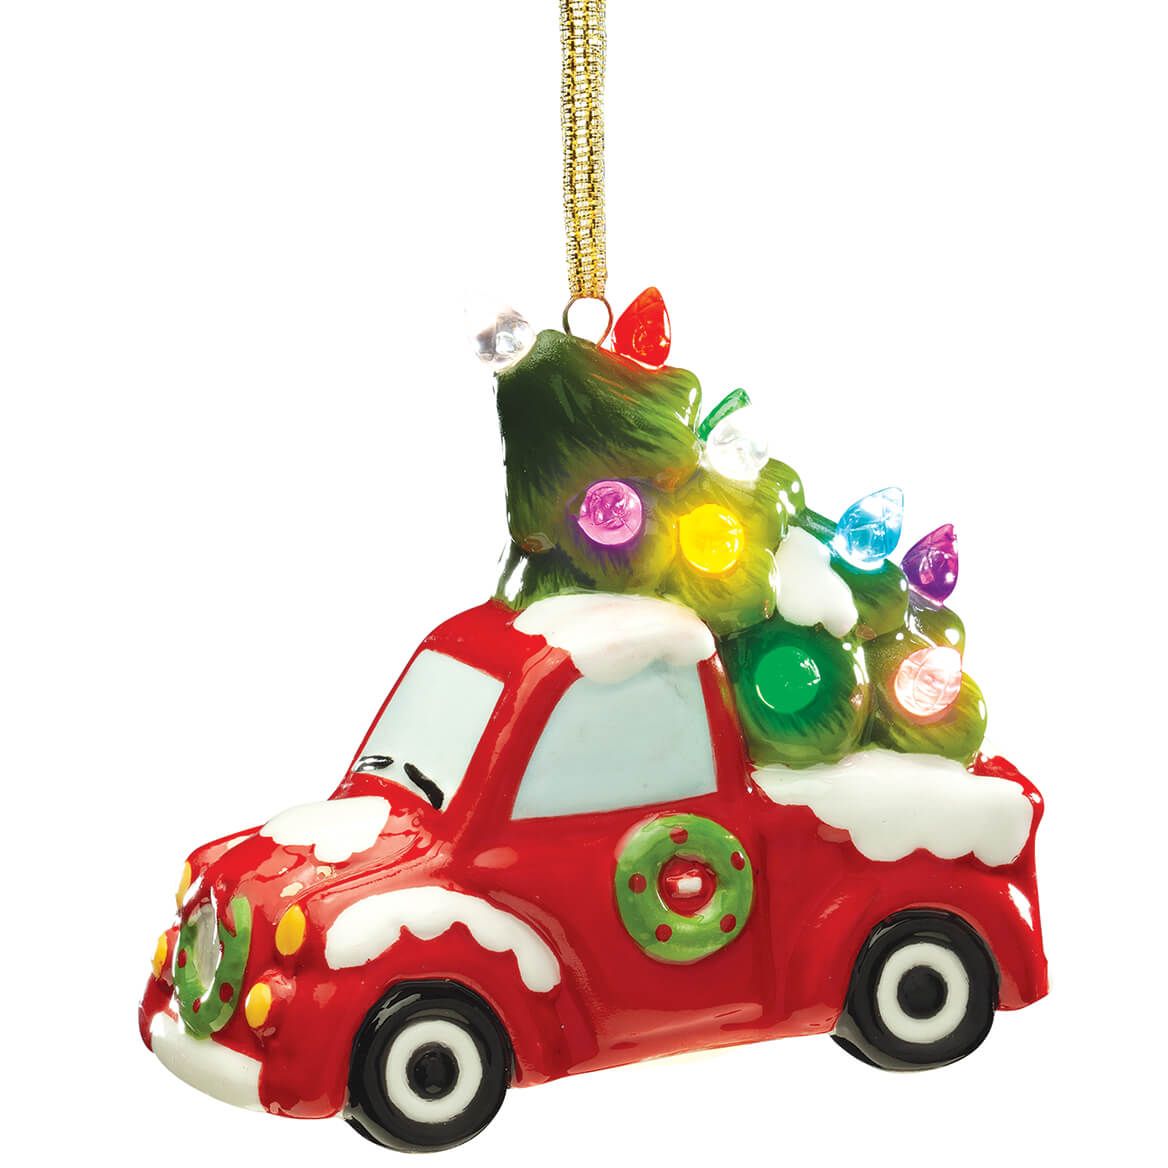 Lighted Red Truck Ornament by Holiday Peak™ + '-' + 372227